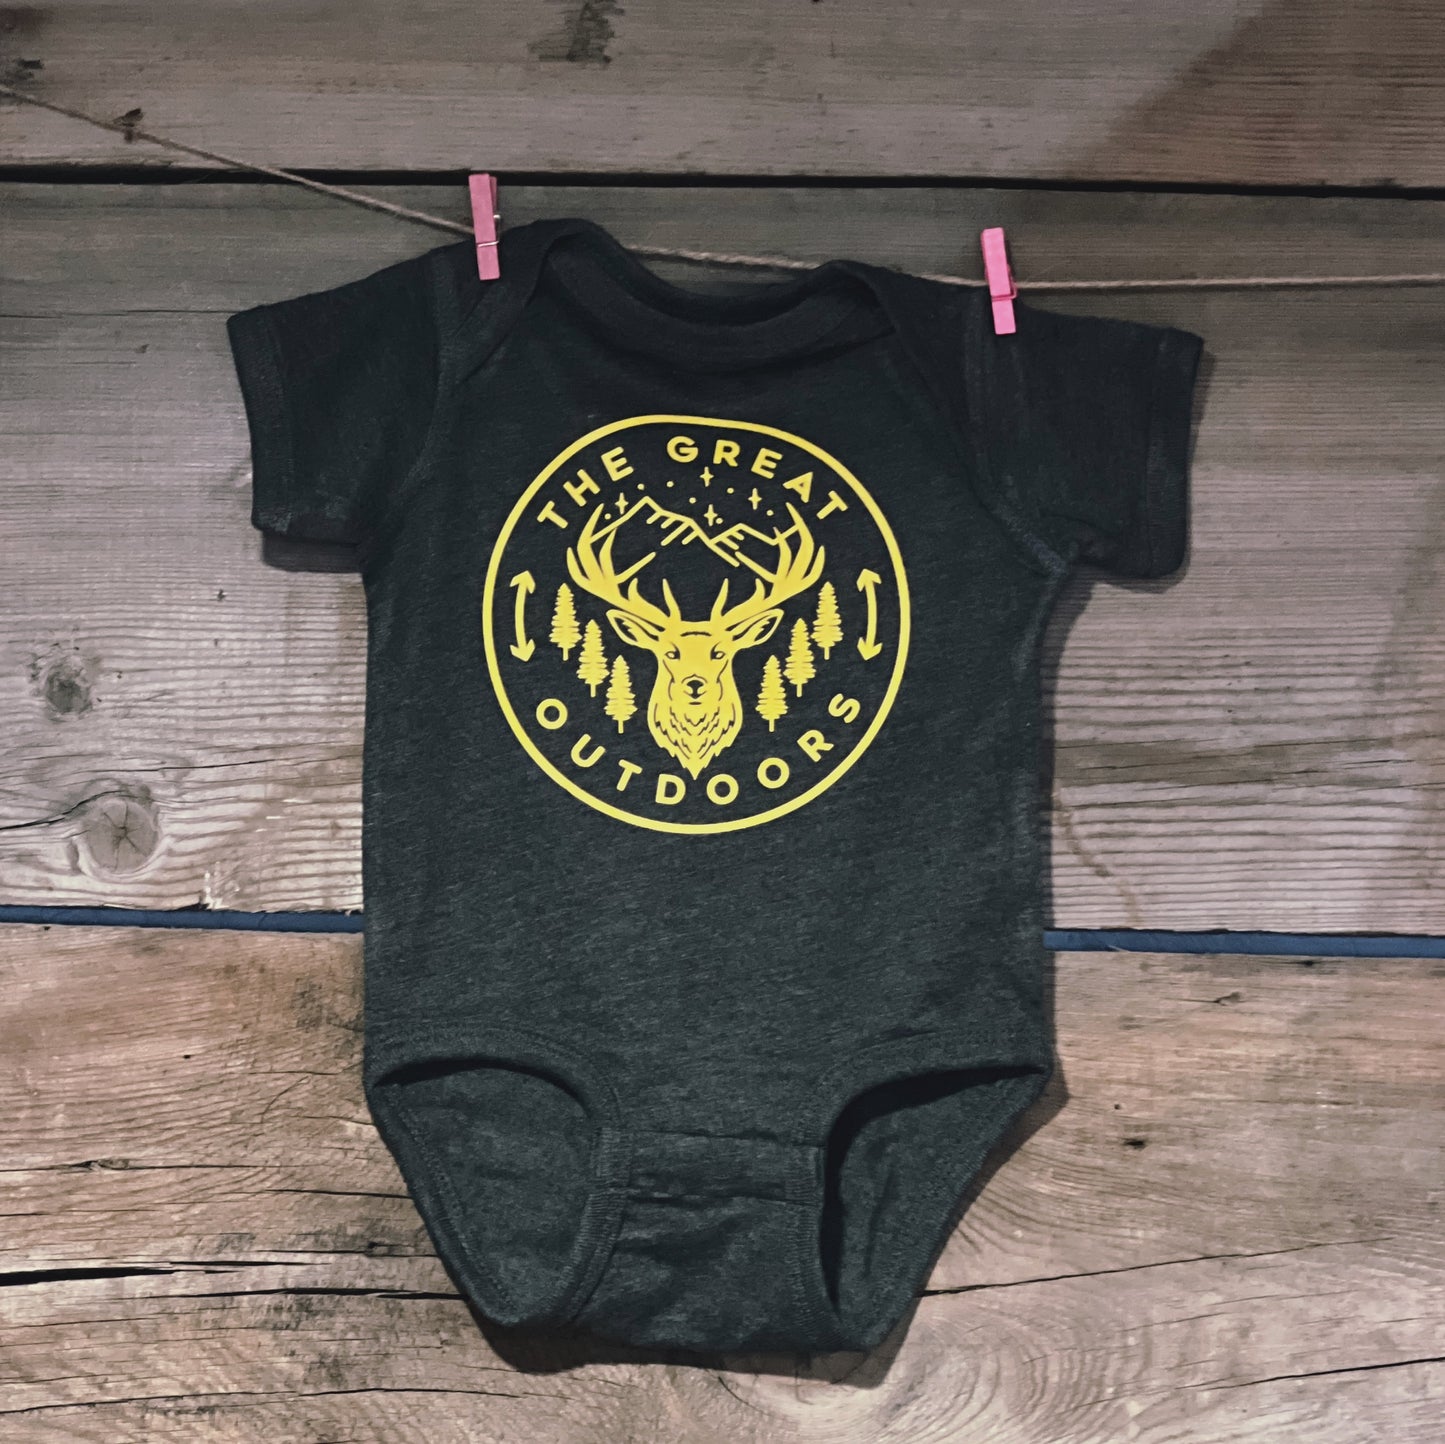 The Great Outdoors Onesie